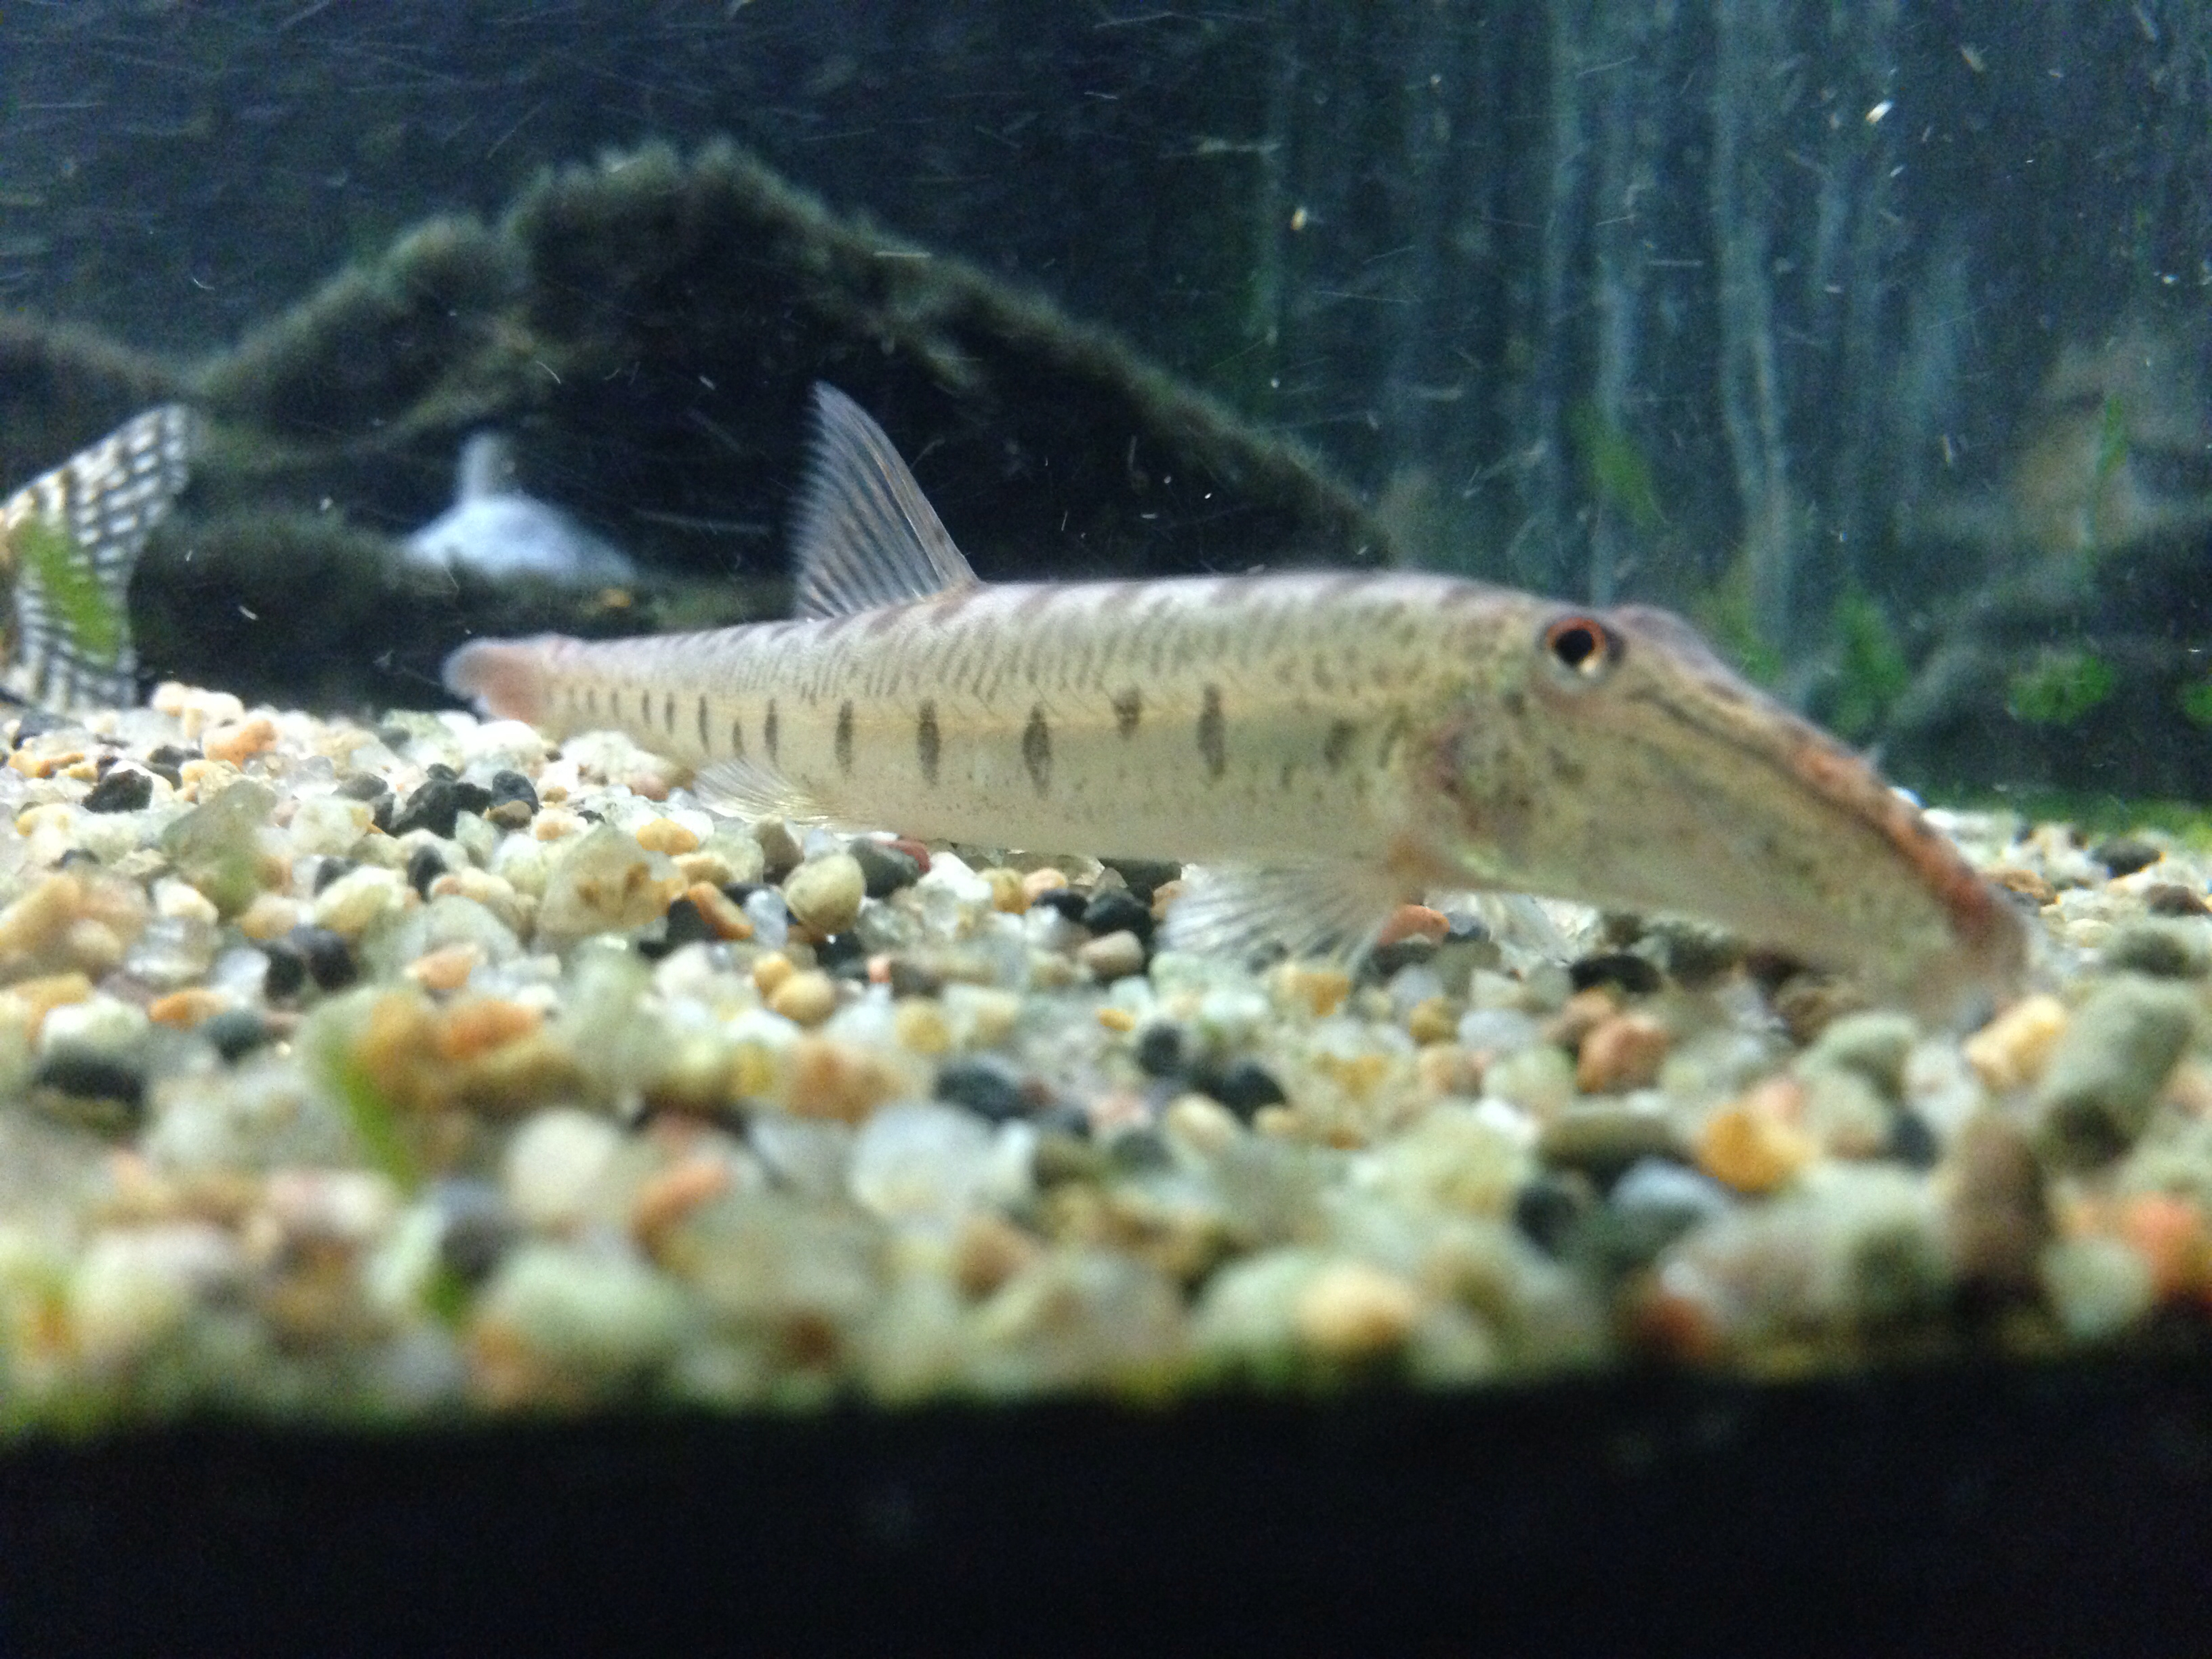 Horse face loach | My other fishes | Pinterest | Horse face, Horse ...